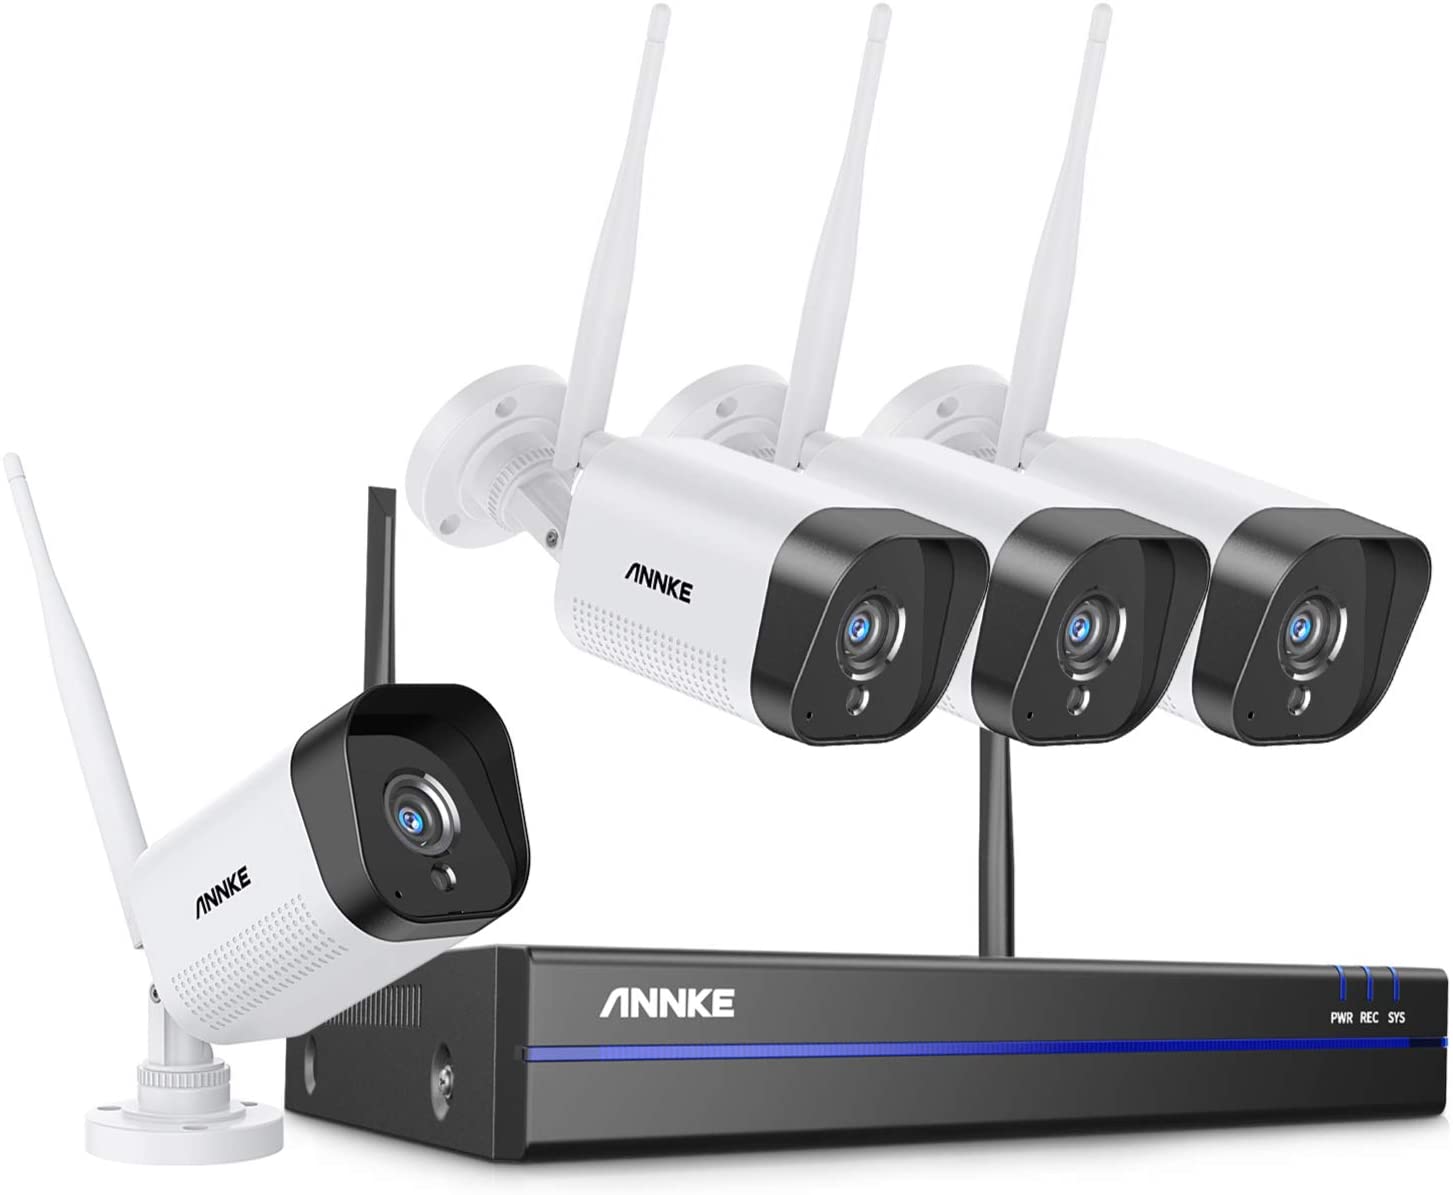 ANNKE 8CH 1080P WiFi Video Surveillance Kit Plug and Play System H.264 + WIFI Bullet Camera Night Vision External Remote Access Without HDD 4cam